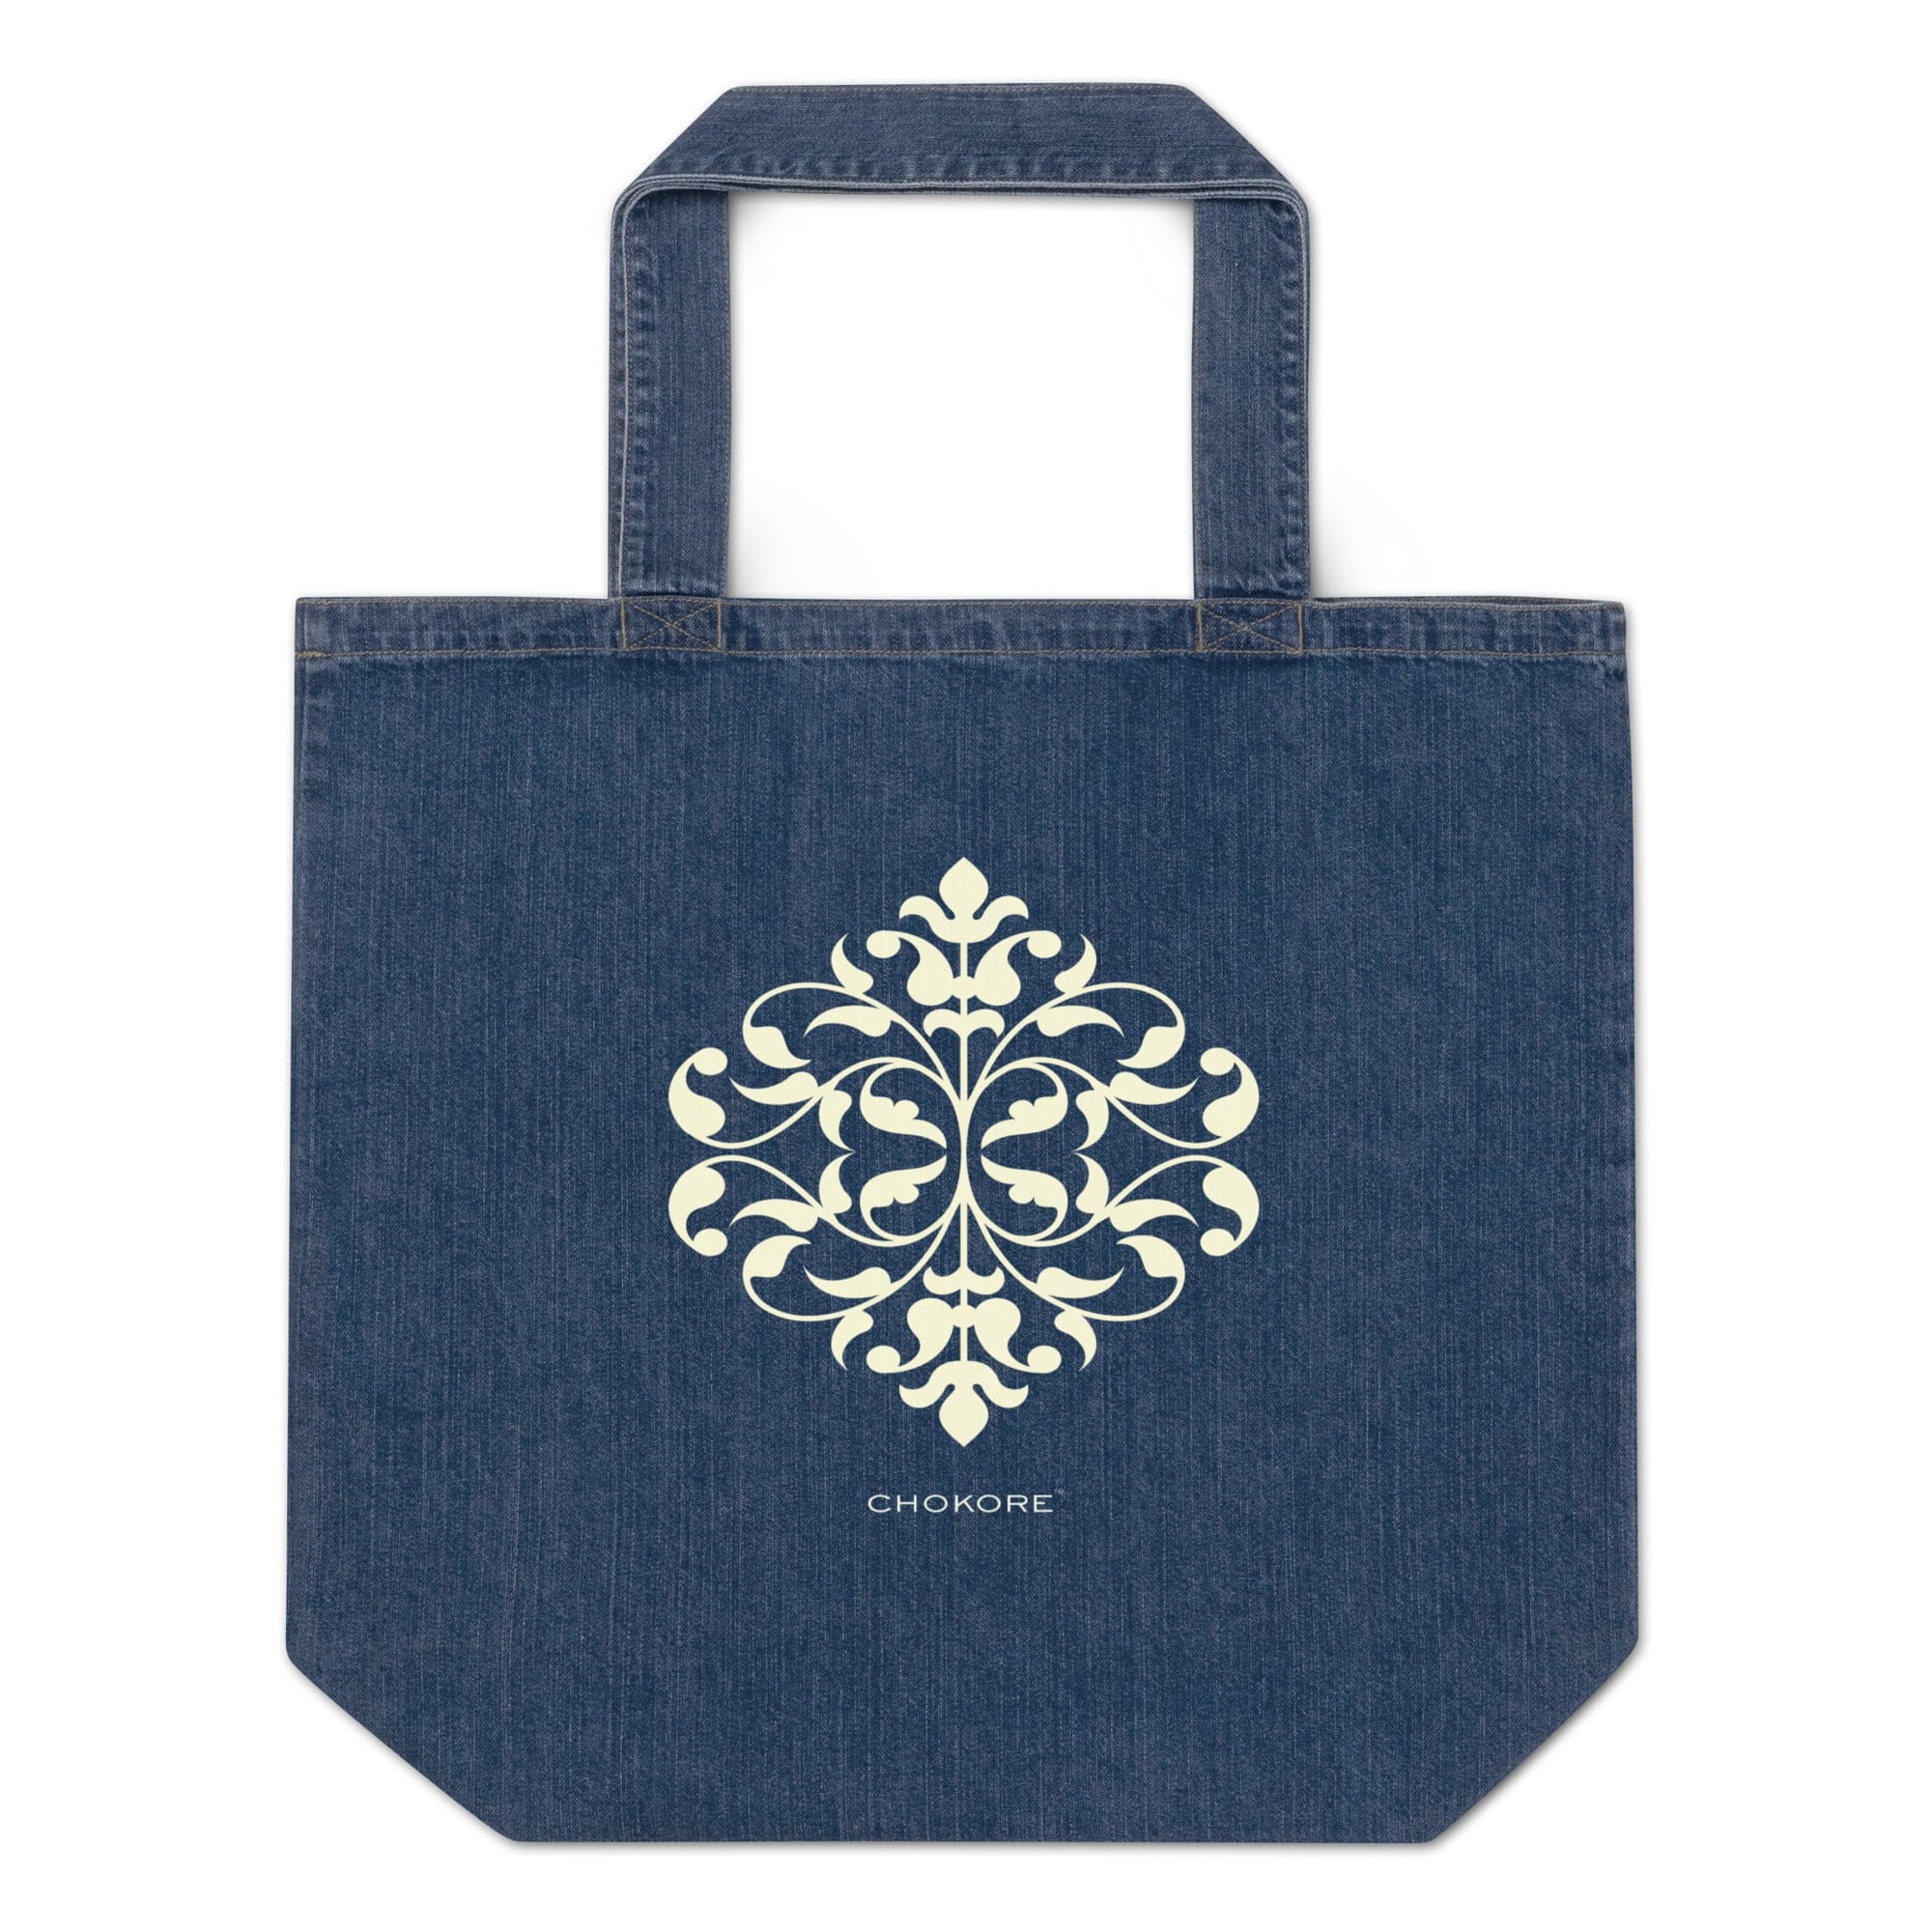 Organic Denim Tote Bag. From the Indian at Heart collection